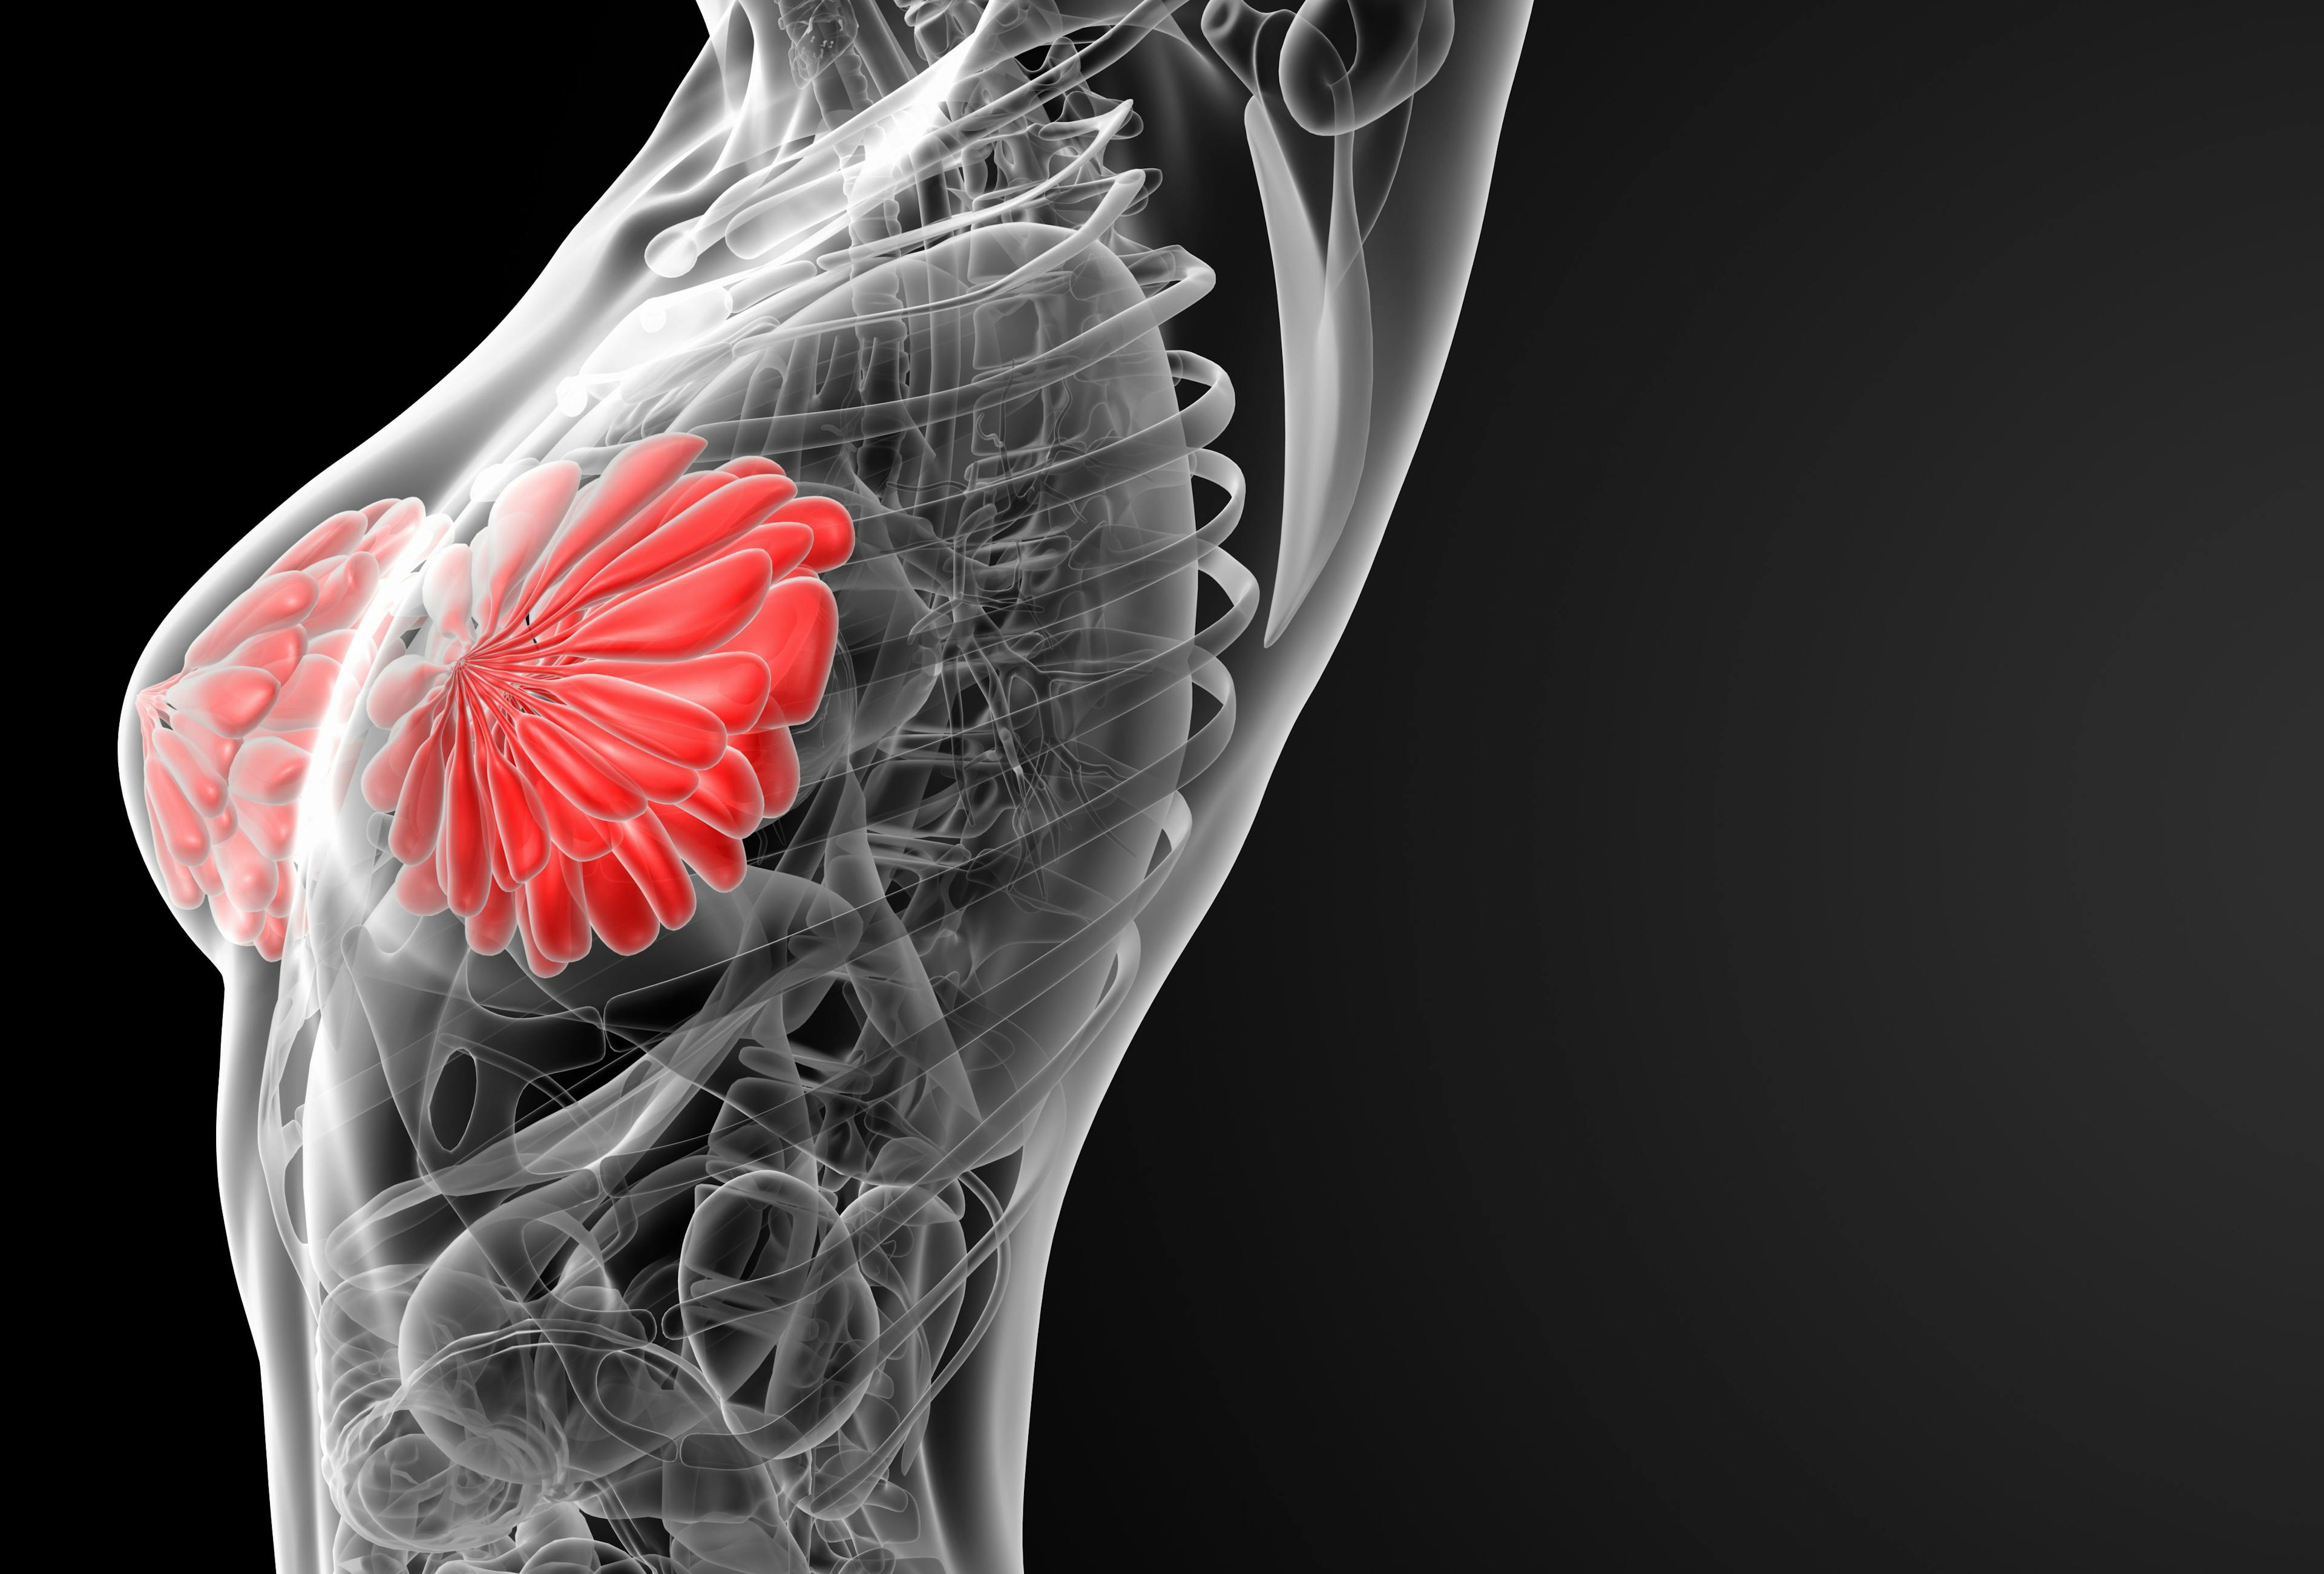 Breast cancer mortality could be reduced by half for patients with ATM, CHEK2, and PALB2 pathogenic variants who undergo annual MRI screenings between the ages of 30 to 35 years and annual MRI screenings and mammography for those 40 or older.